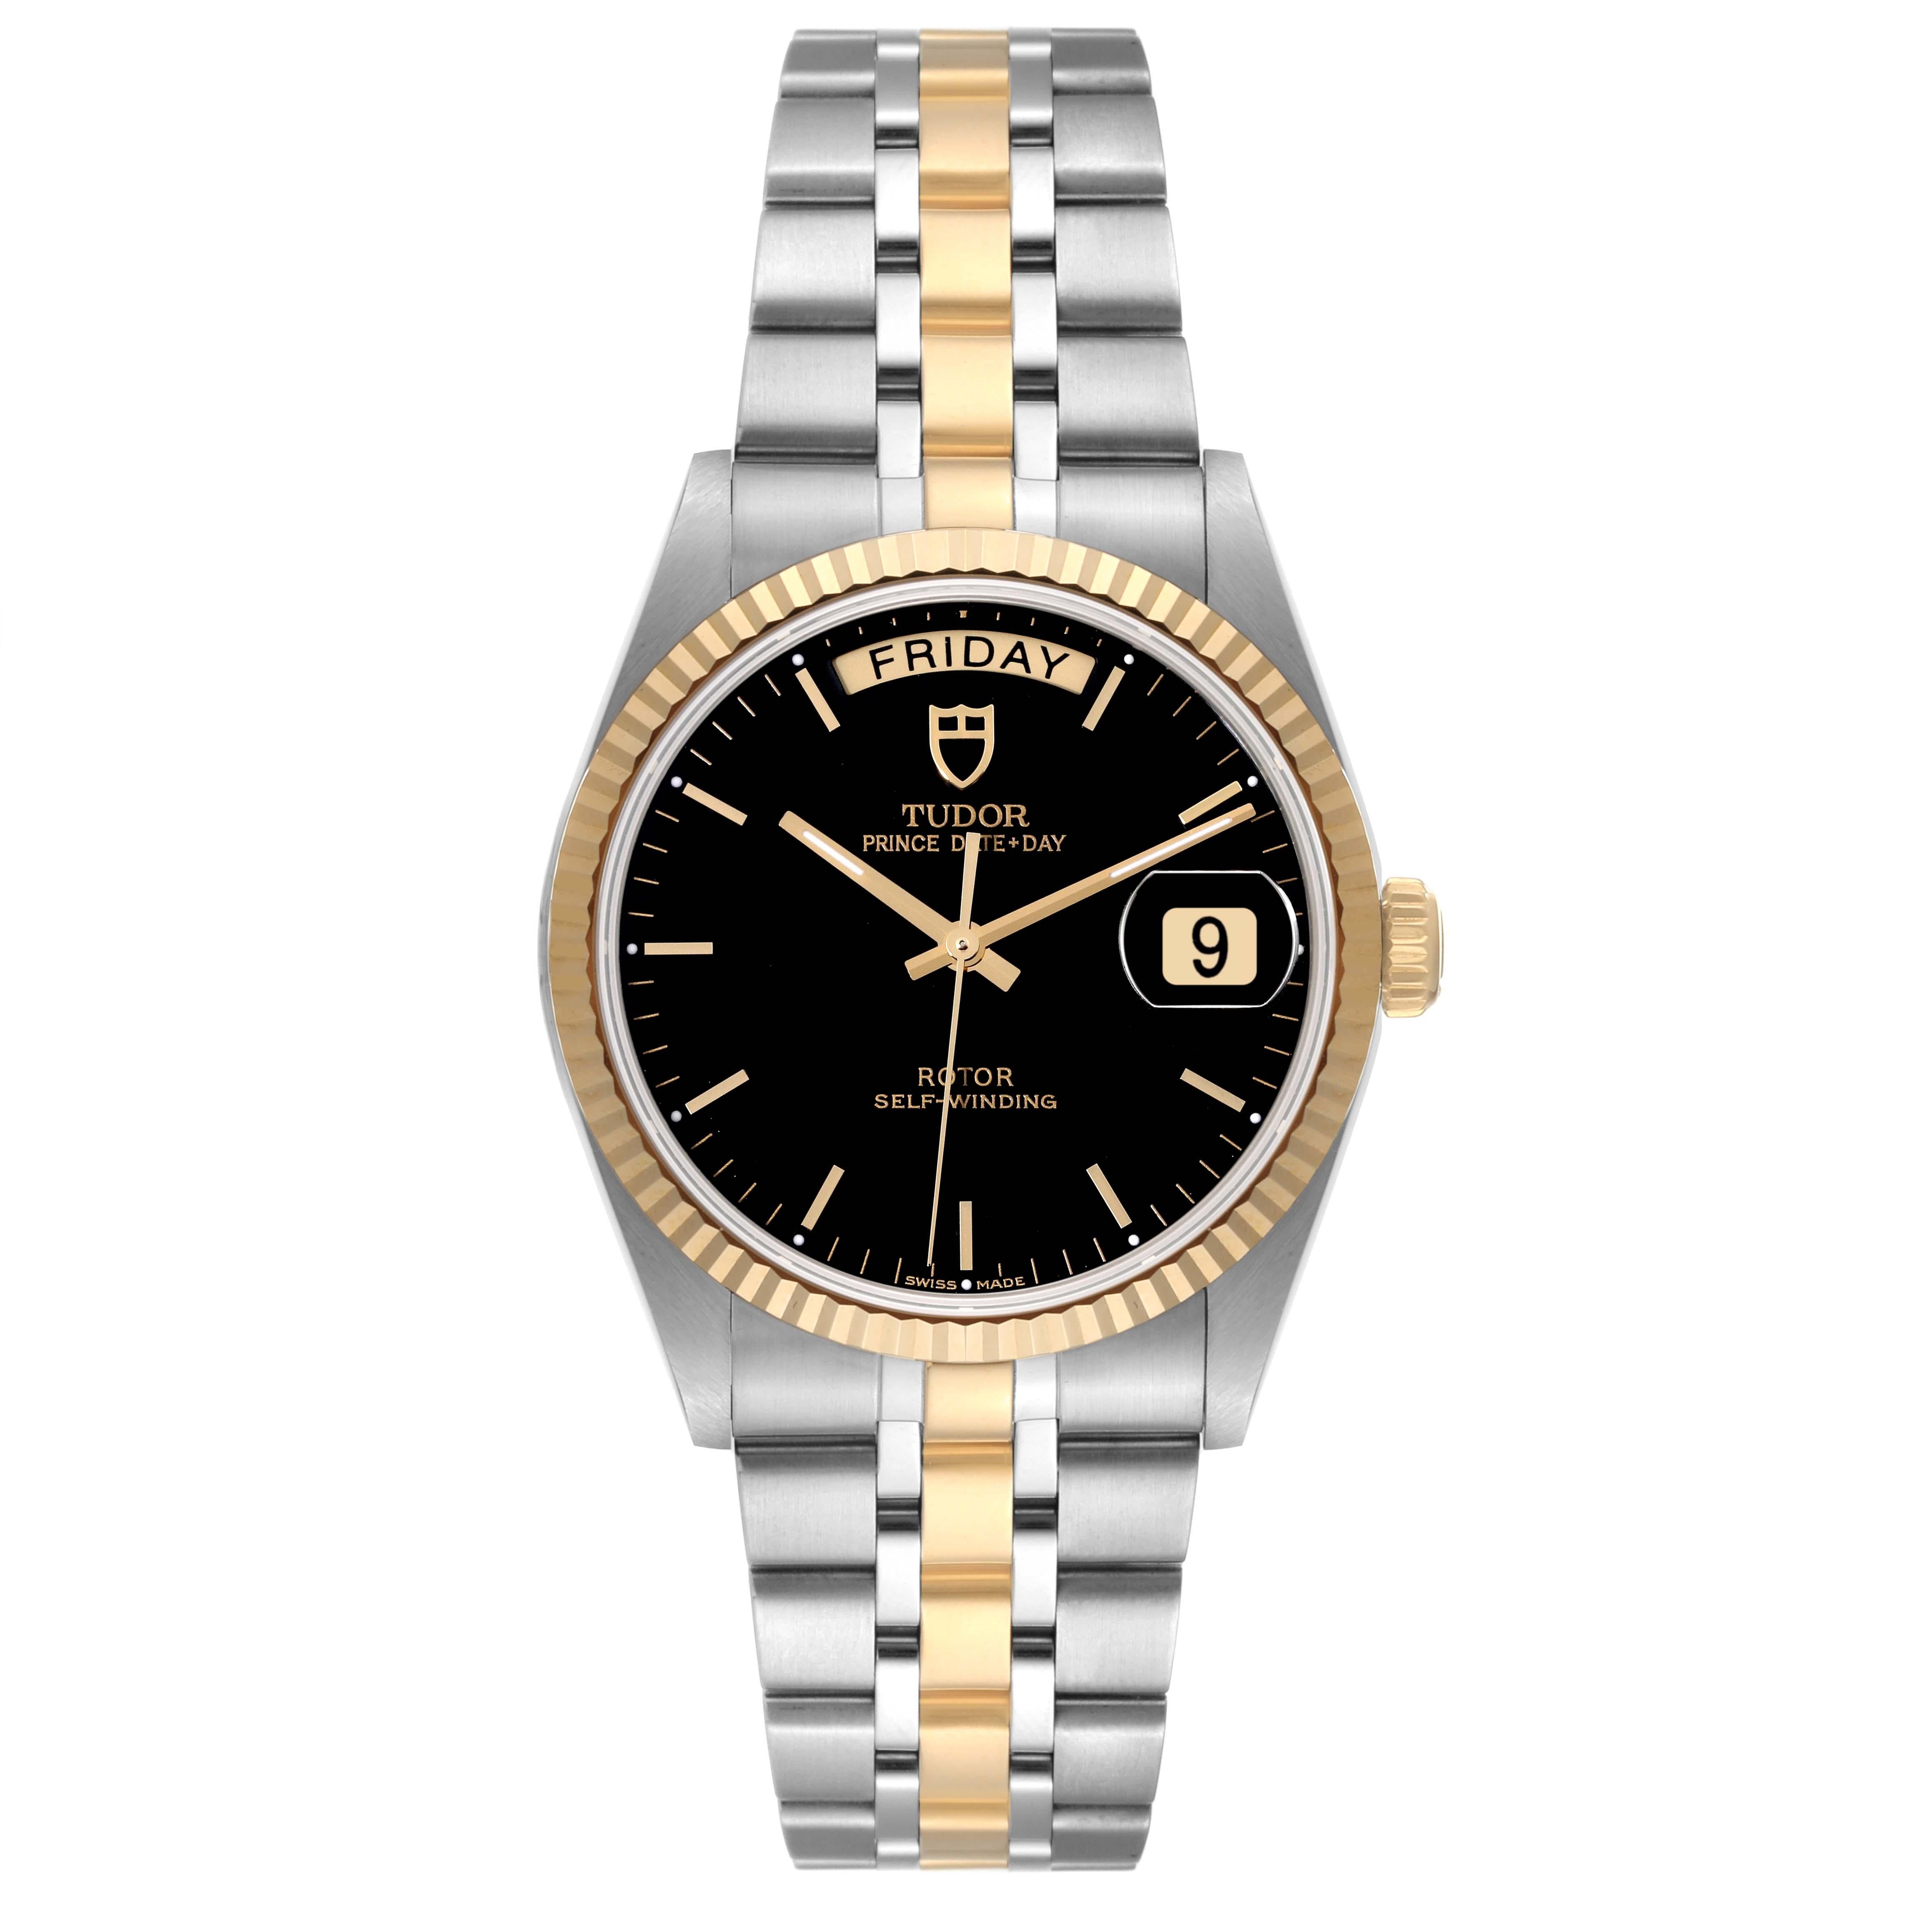 Tudor Day Date Black Dial Steel Yellow Gold Mens Watch 76213 Box Card. Automatic self-winding movement. Stainless steel round case 36.0 mm in diameter. 18k yellow gold fluted bezel. Scratch resistant sapphire crystal with cyclops magnifier. Black